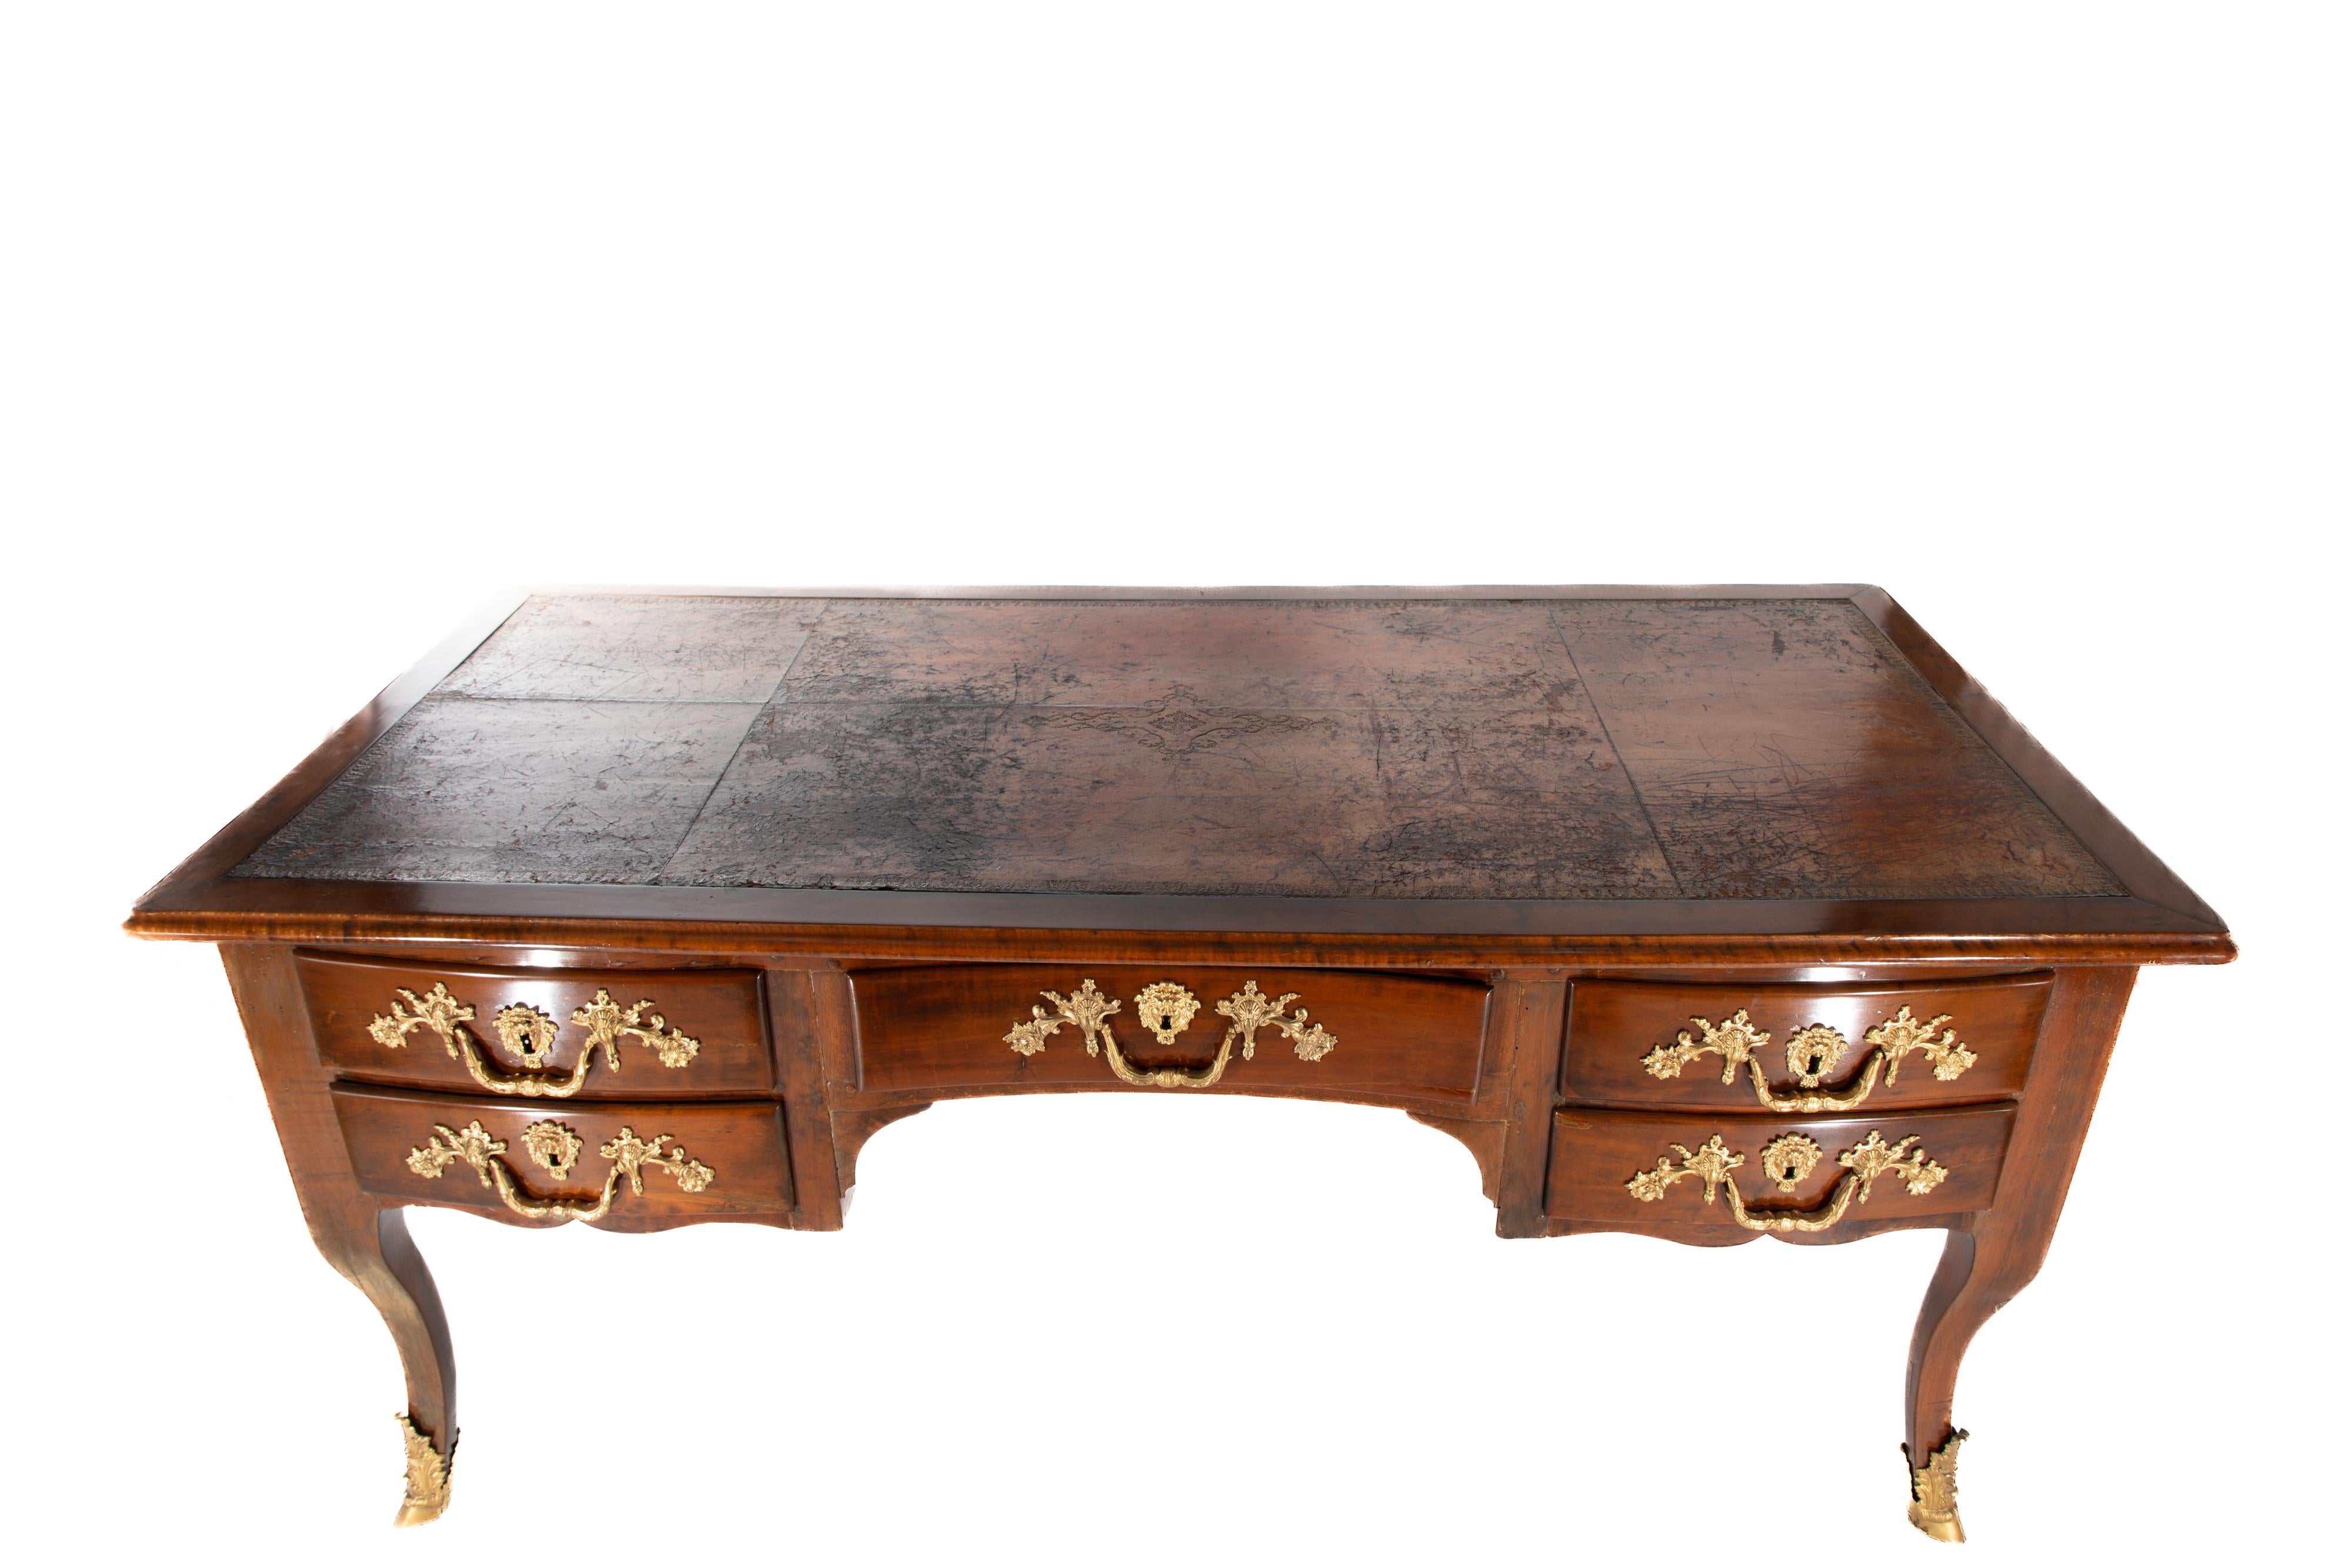 Beautiful 18th century French Regence Bureau Plat.  Four drawers, with pieced leather top with carved design in the center and around the edges.
Walnut wood with gilded hardware resting on gilded hoof feet.
Includes two keys and additional pull.